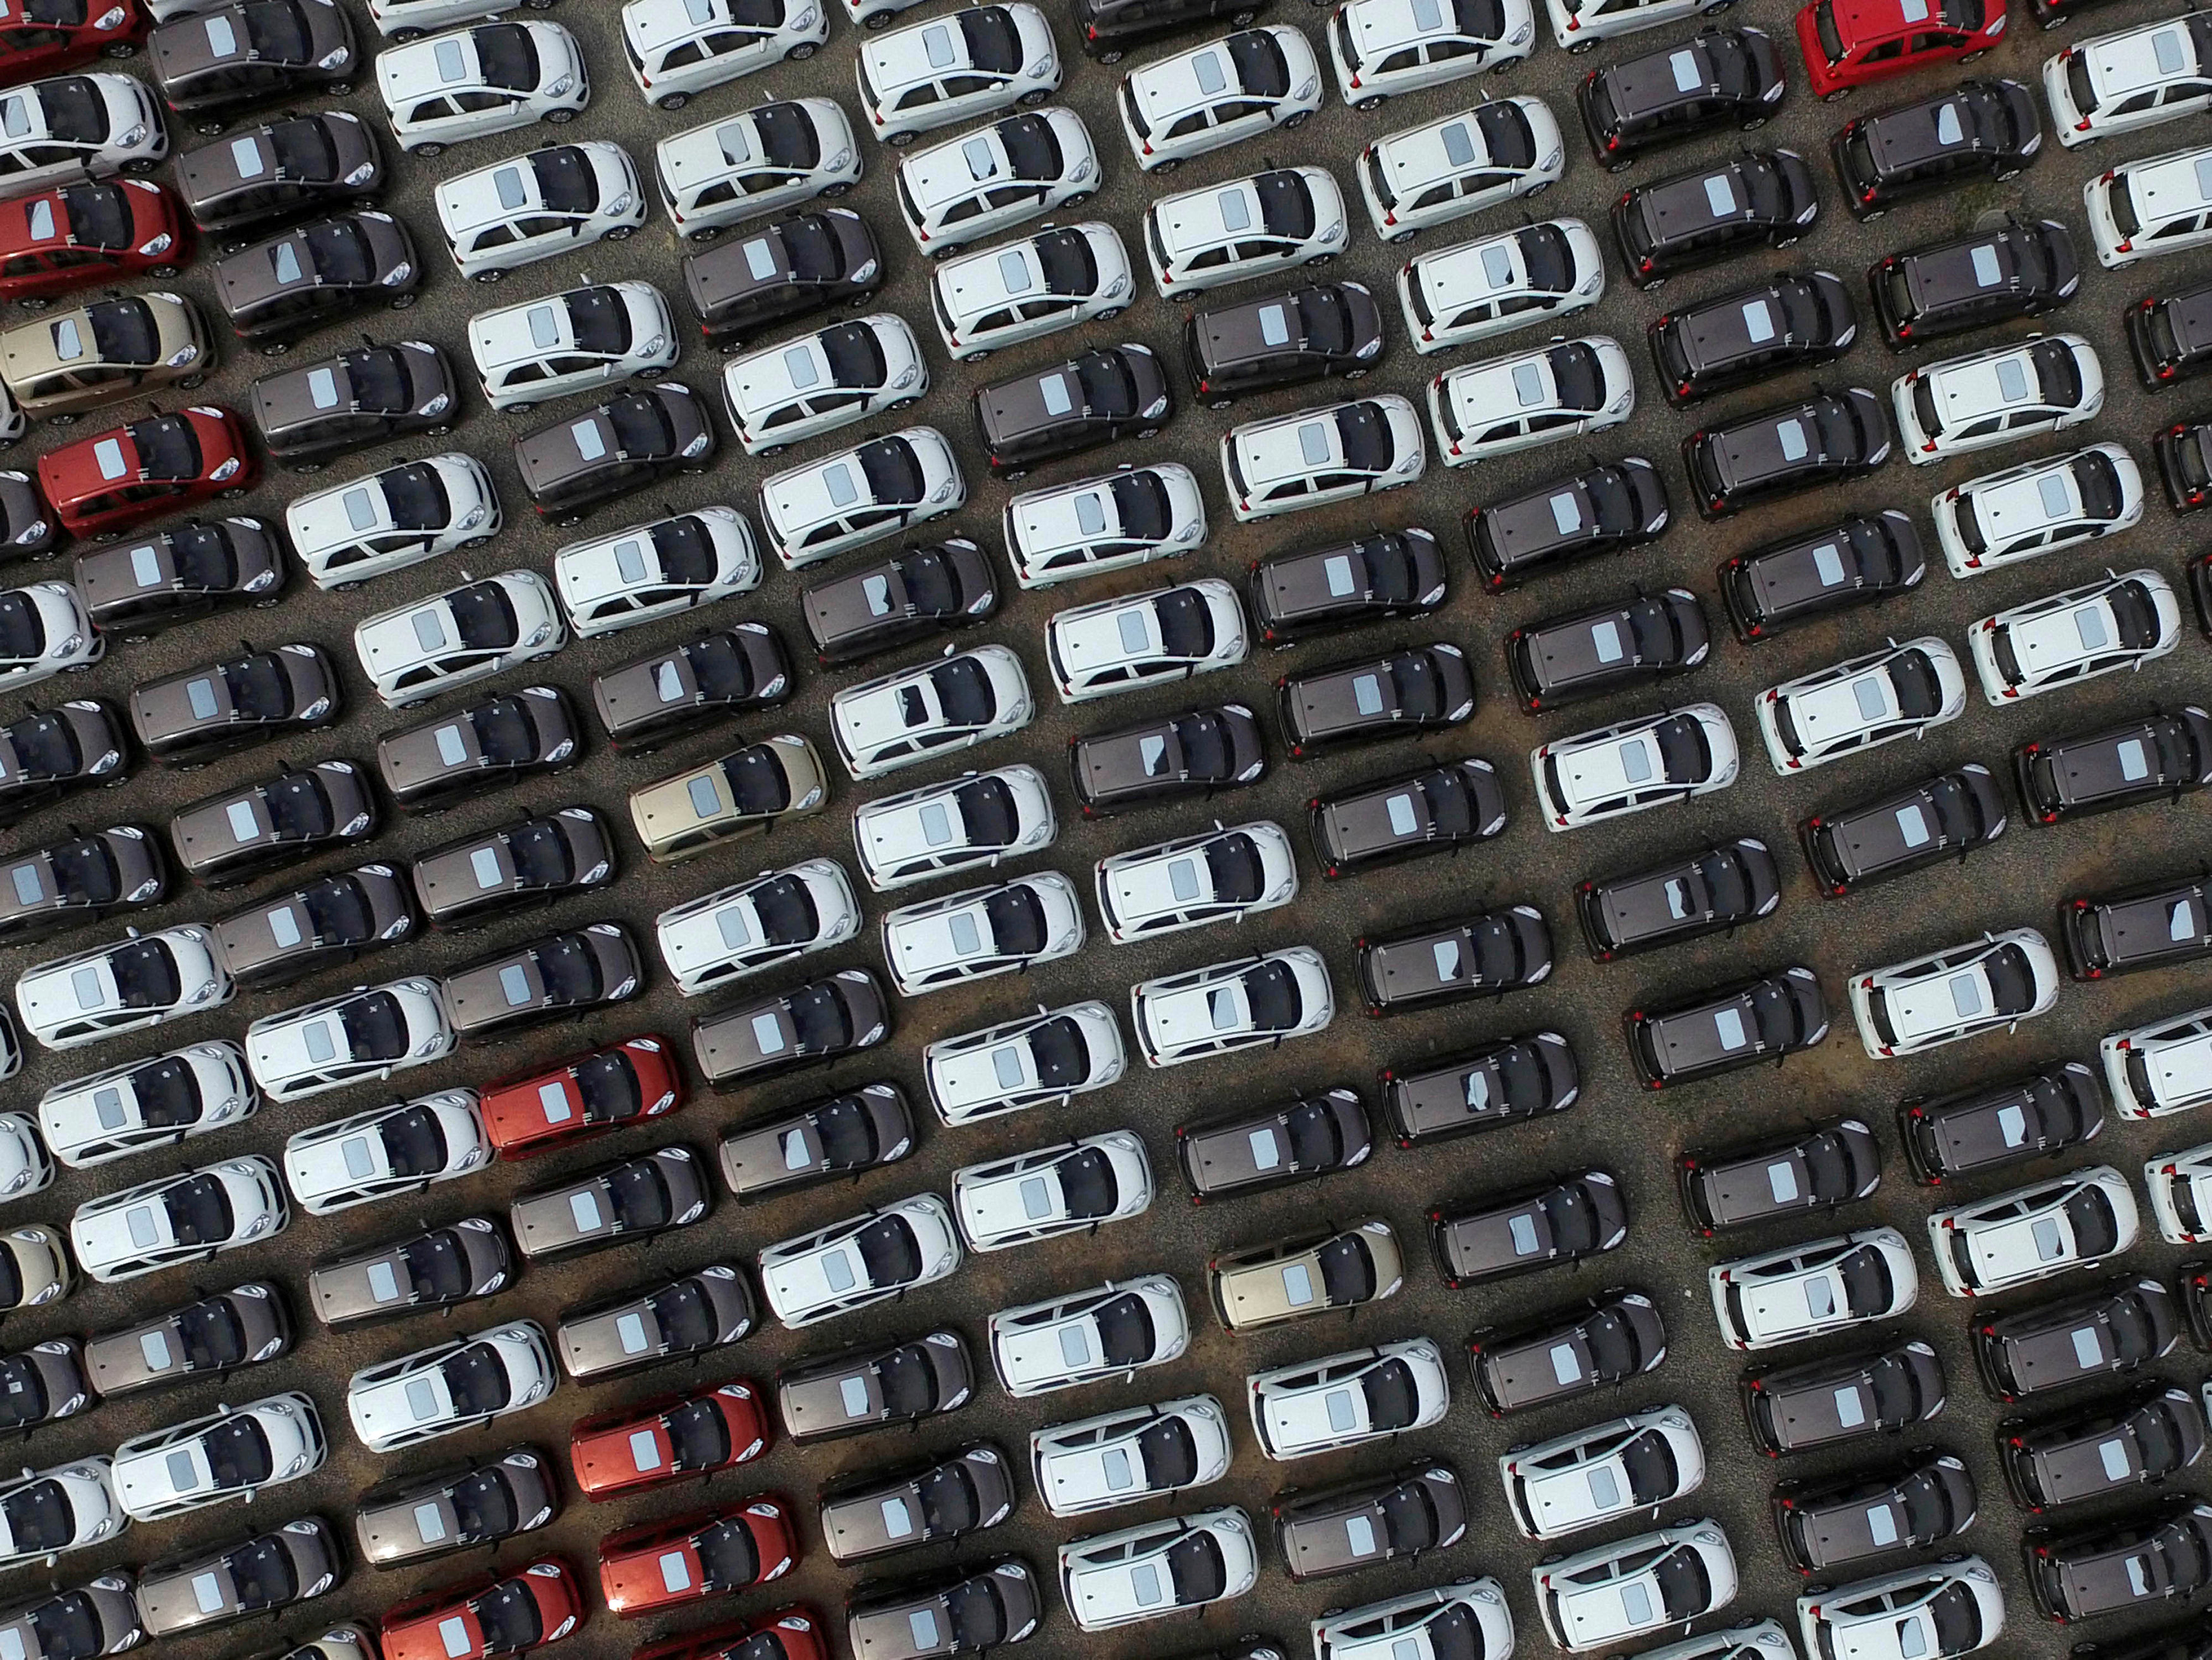 China considering roll back electric car quotas